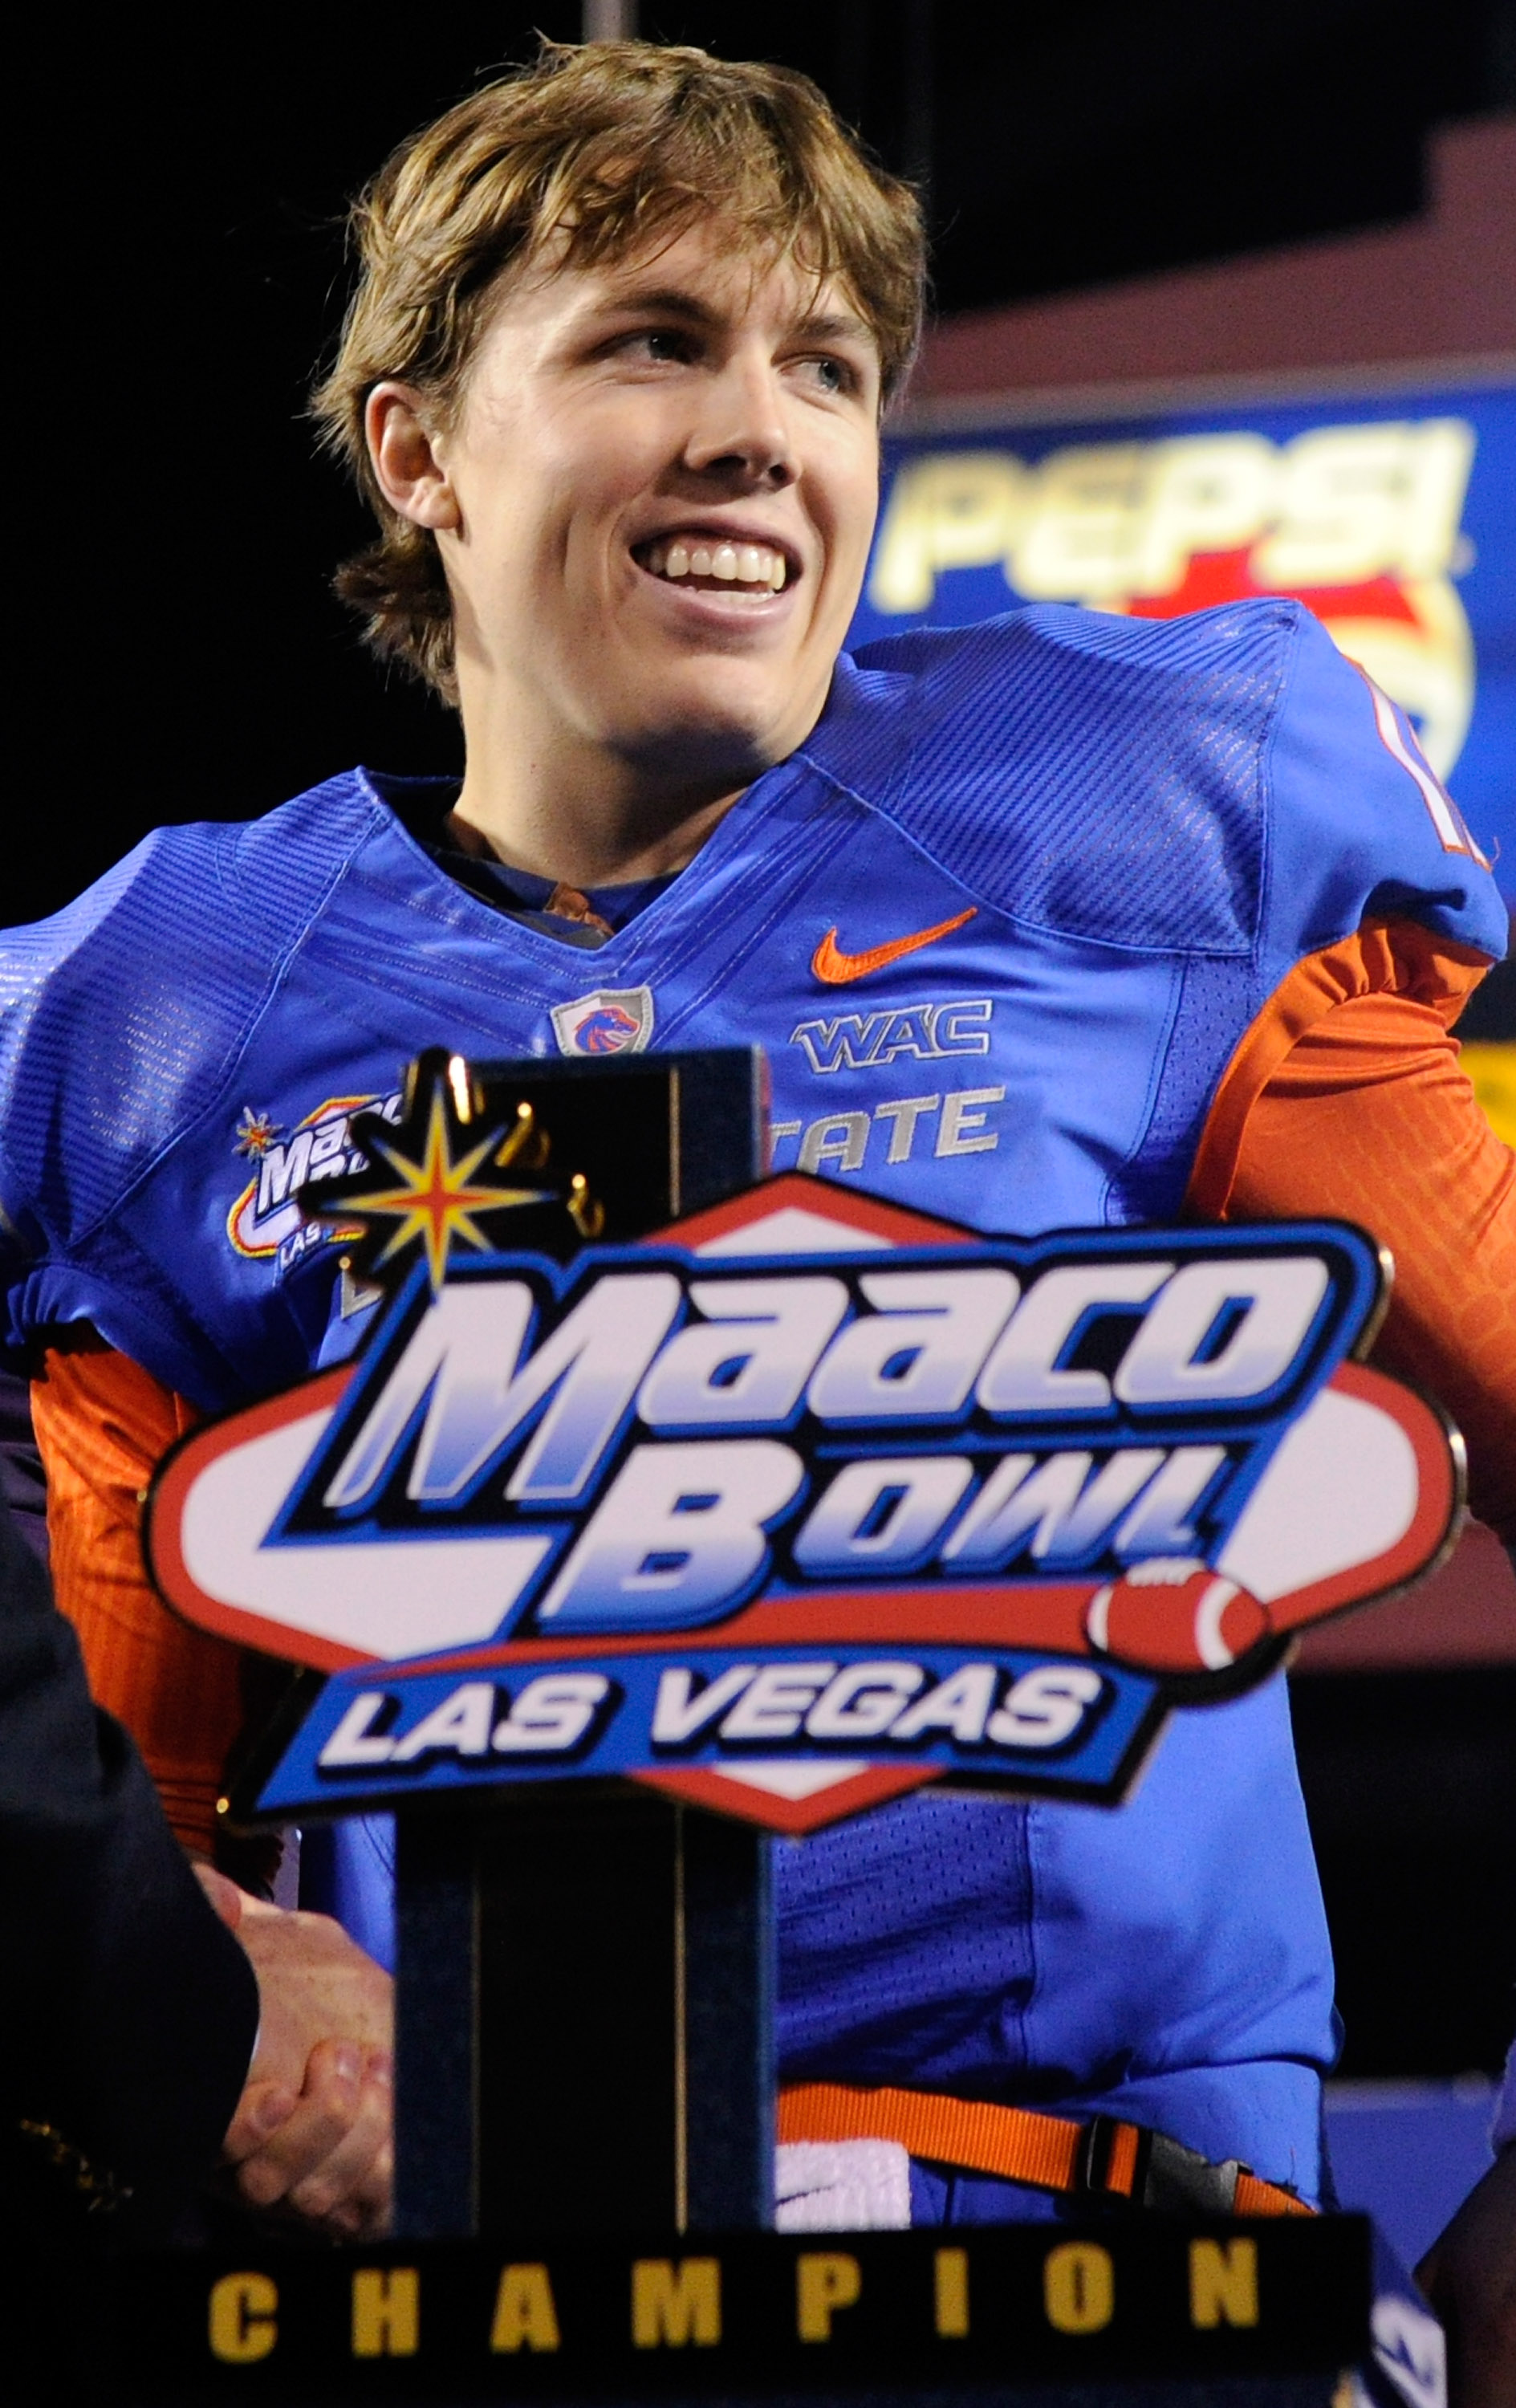 LAS VEGAS, NV - DECEMBER 22:  Quarterback Kellen Moore #11 of the Boise State Broncos smiles while standing behind a trophy as he celebrates the team's 26-3 victory over the Utah Utes in the MAACO Bowl Las Vegas at Sam Boyd Stadium December 22, 2010 in La